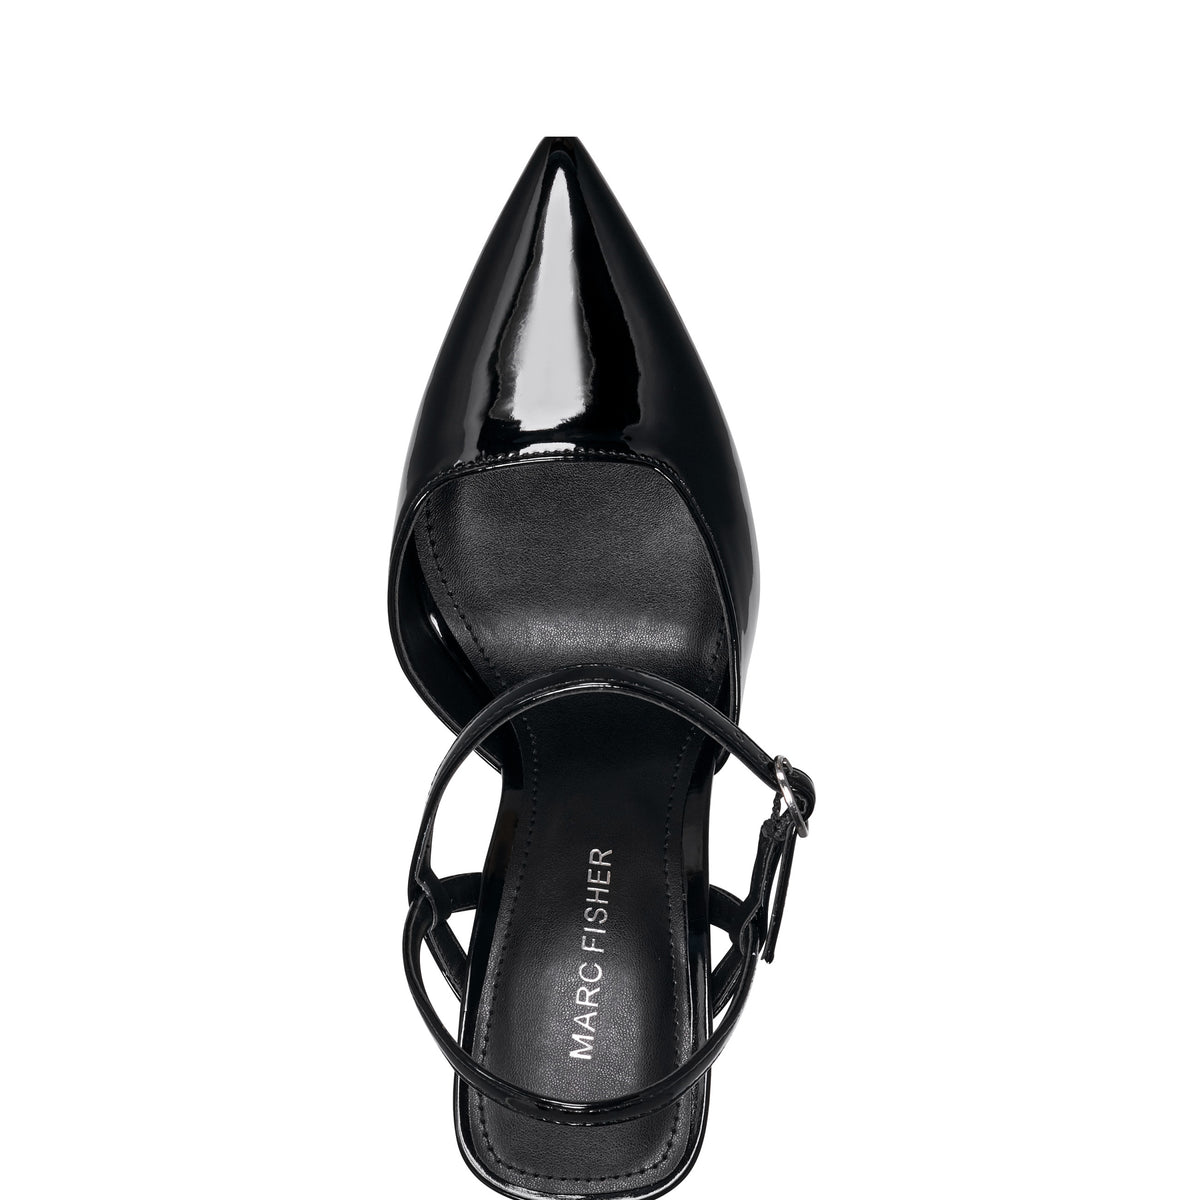 Doster Pointy Toe Slingback